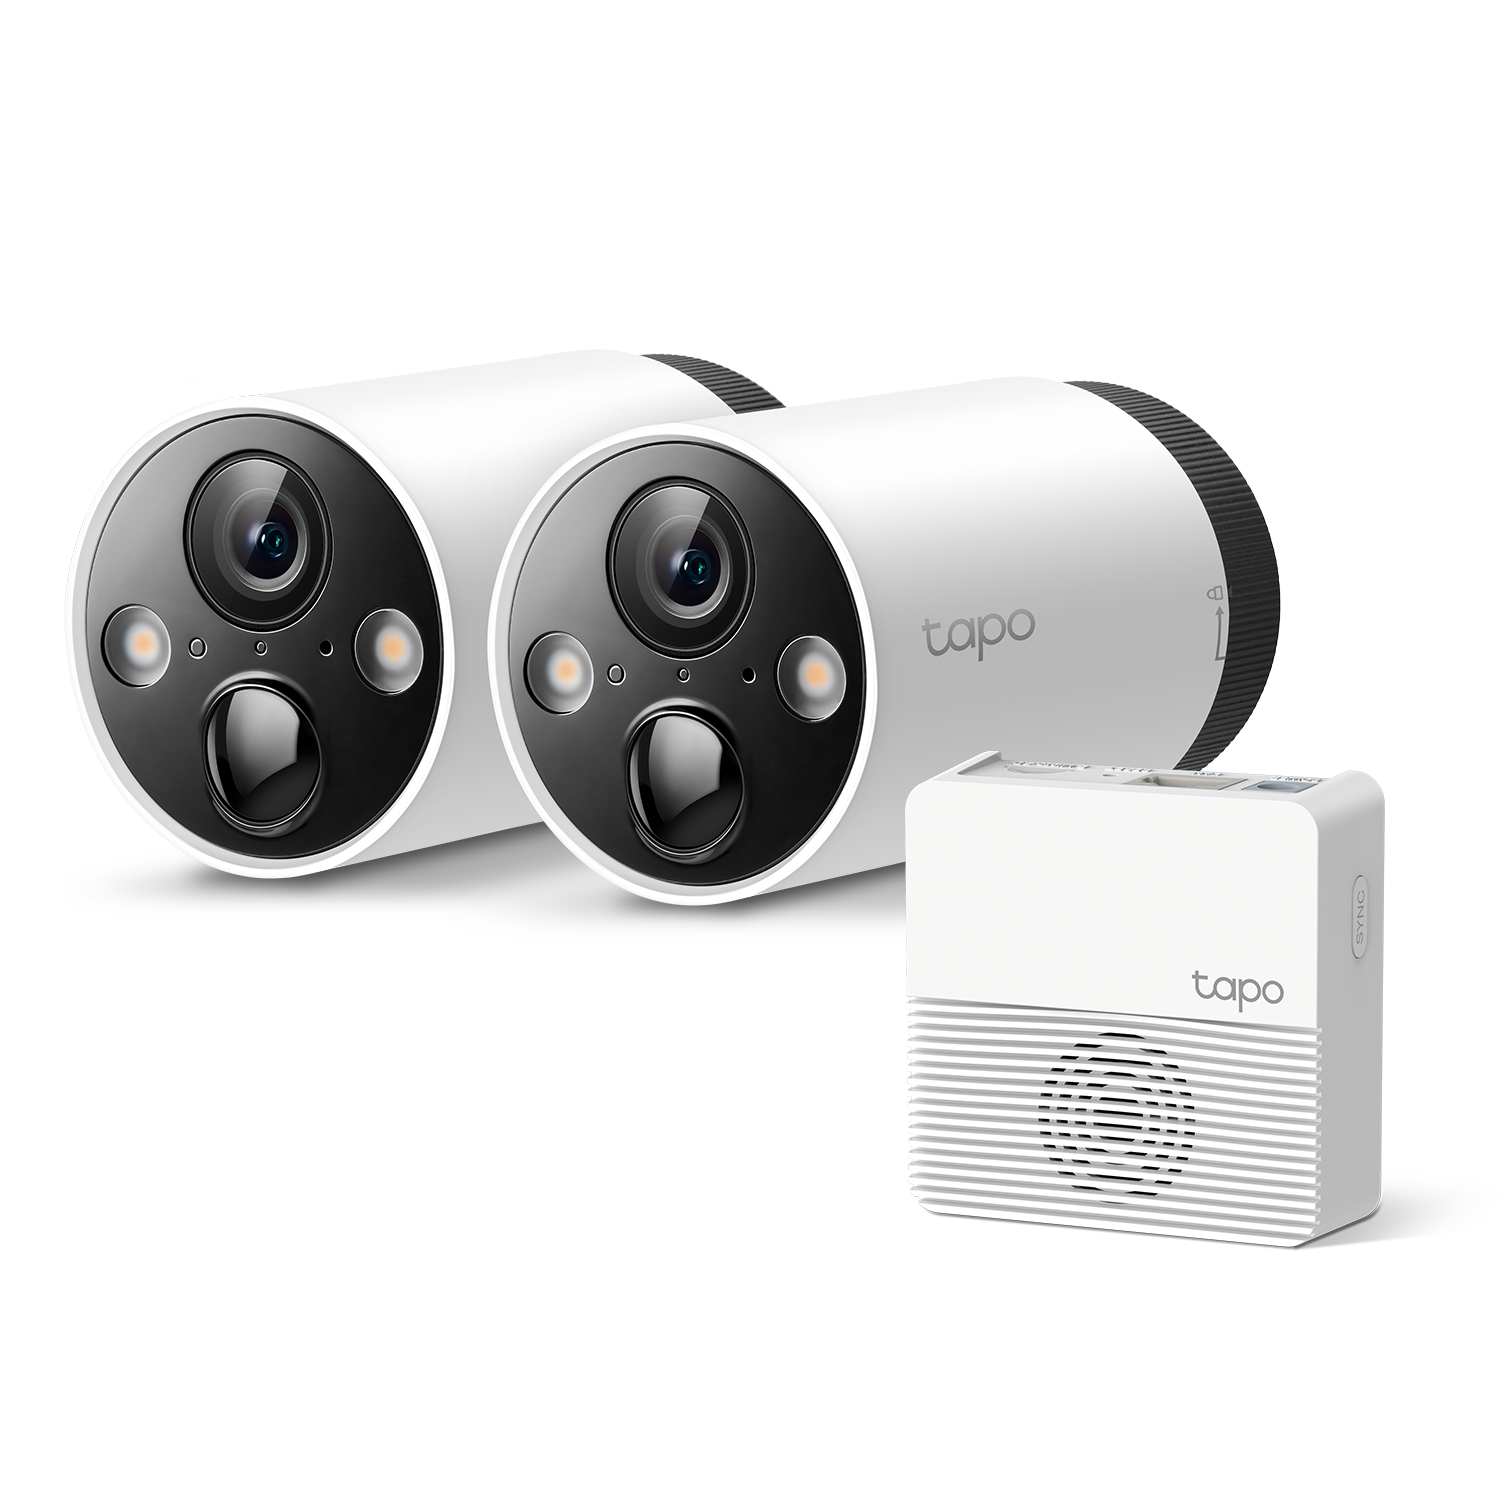 TP-Link Tapo C420S2 security camera review